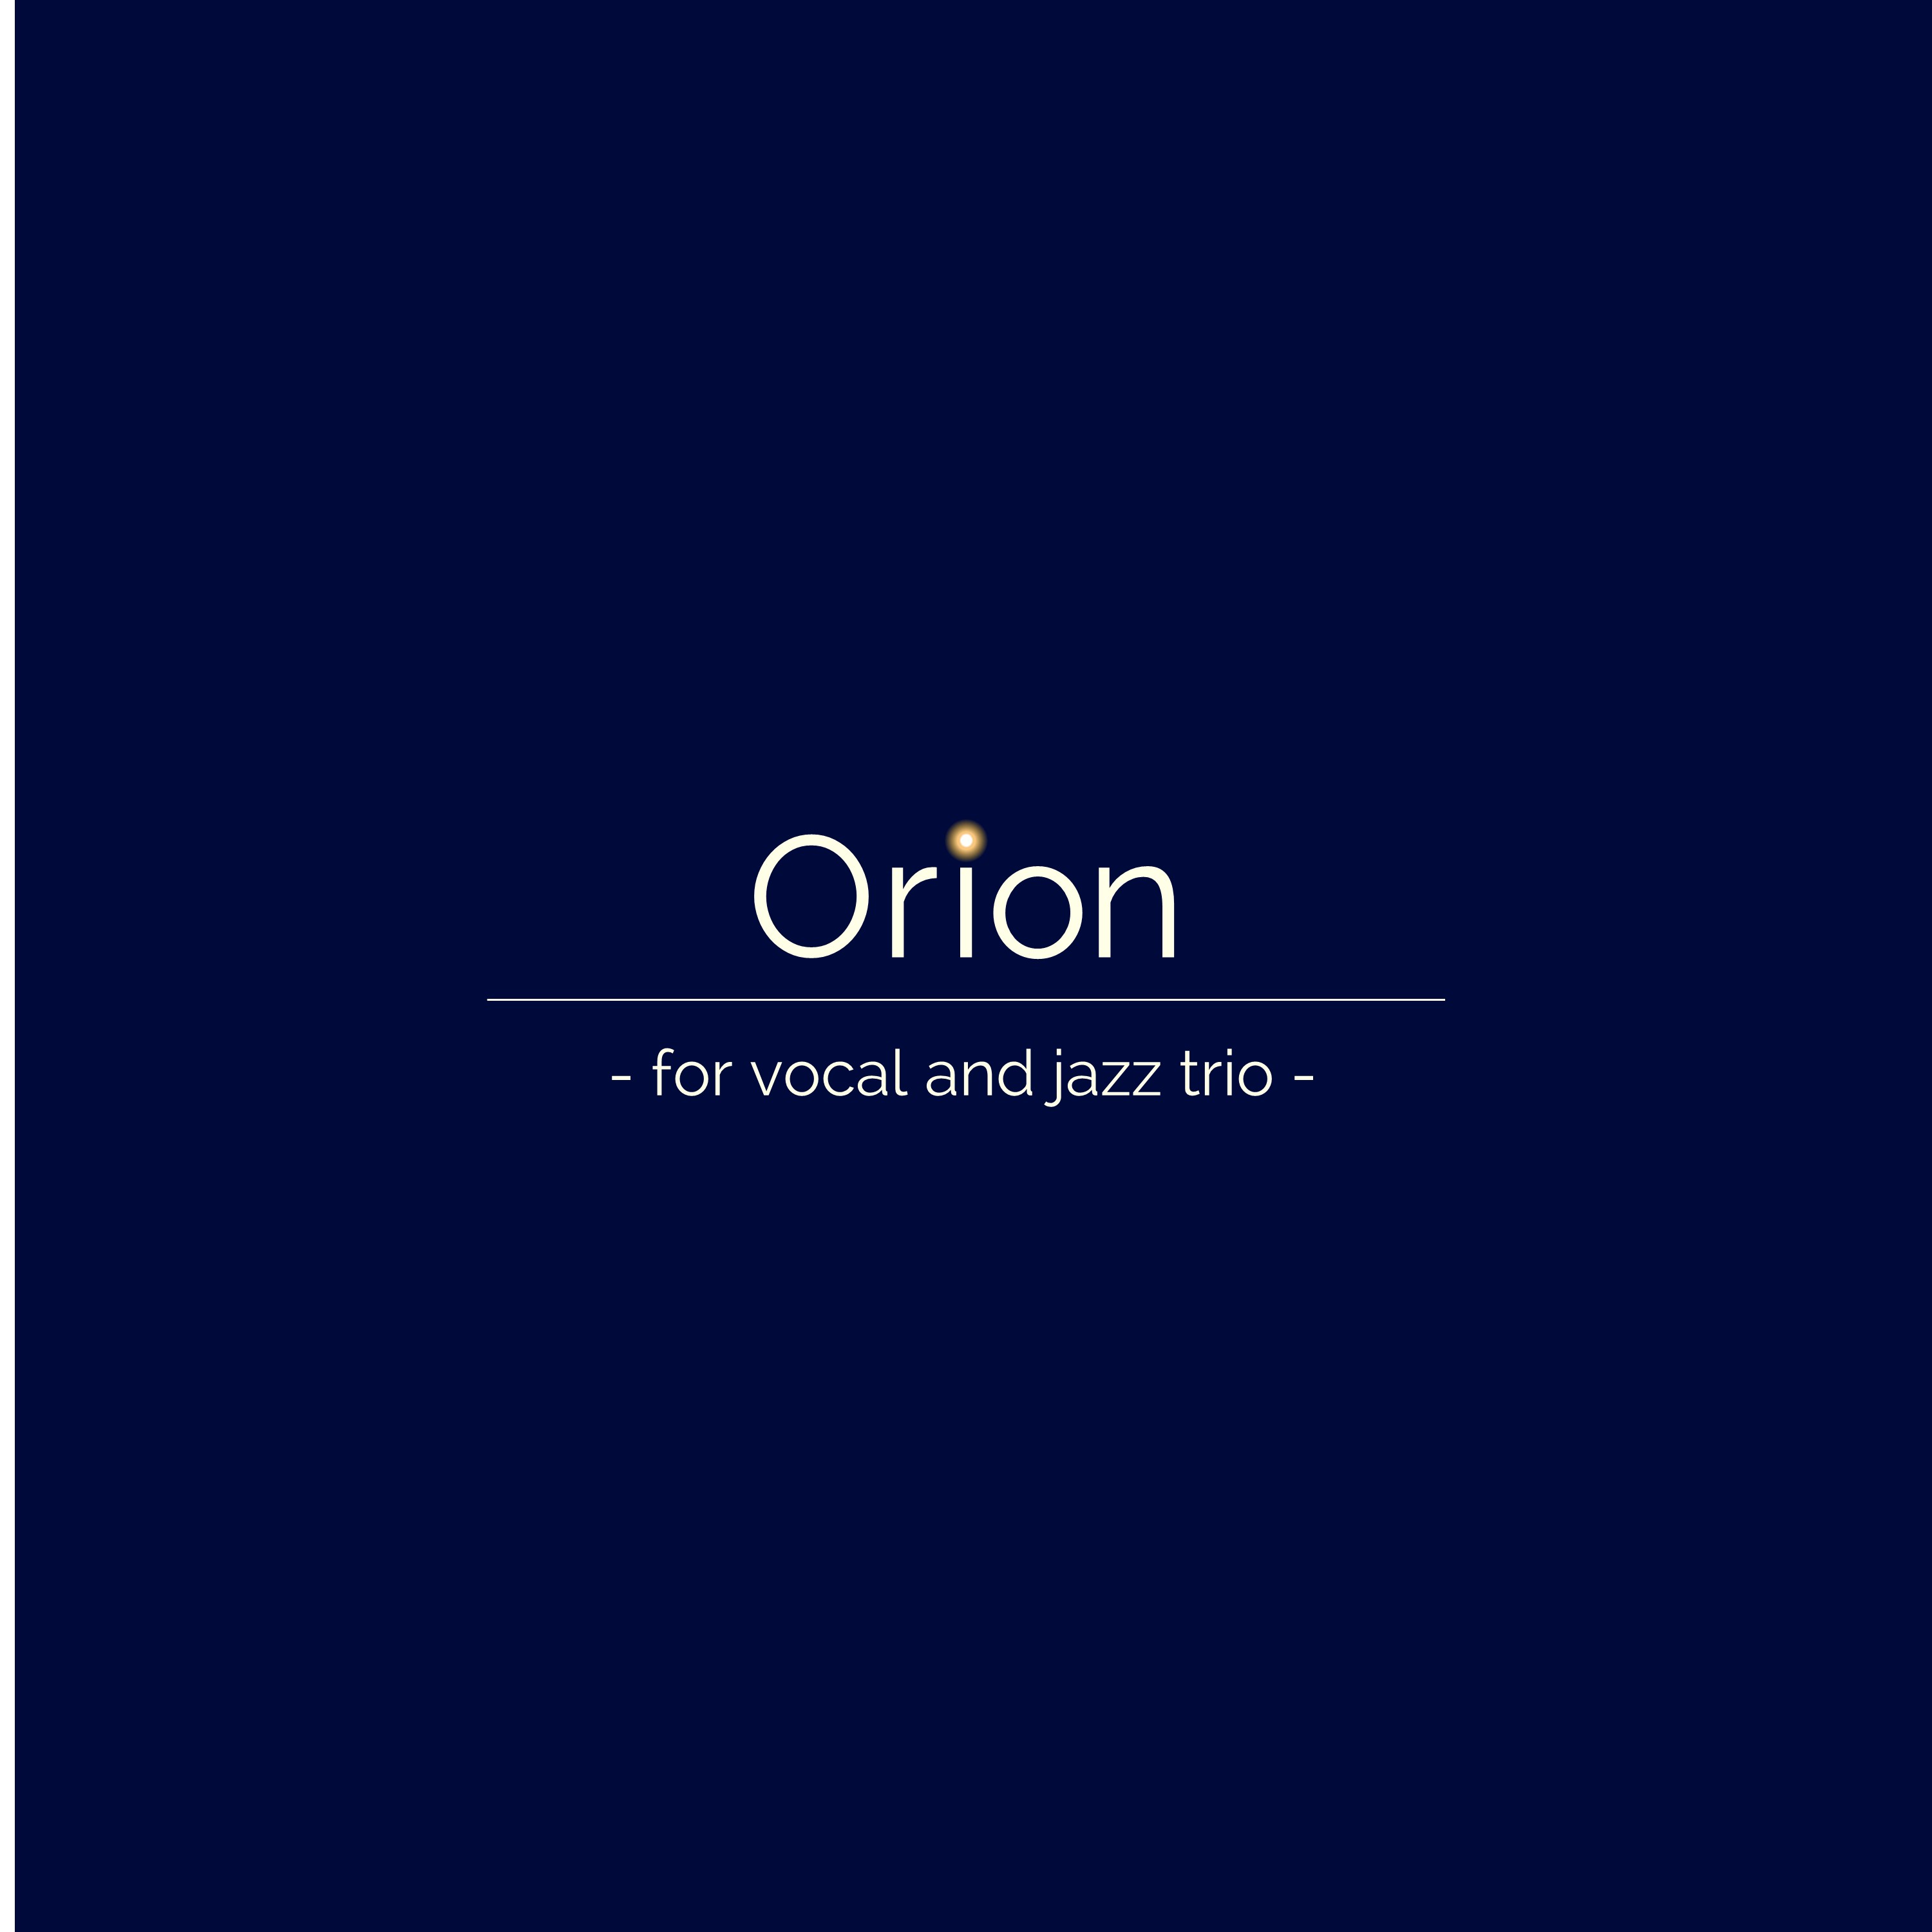 Orion for vocal and jazz trio